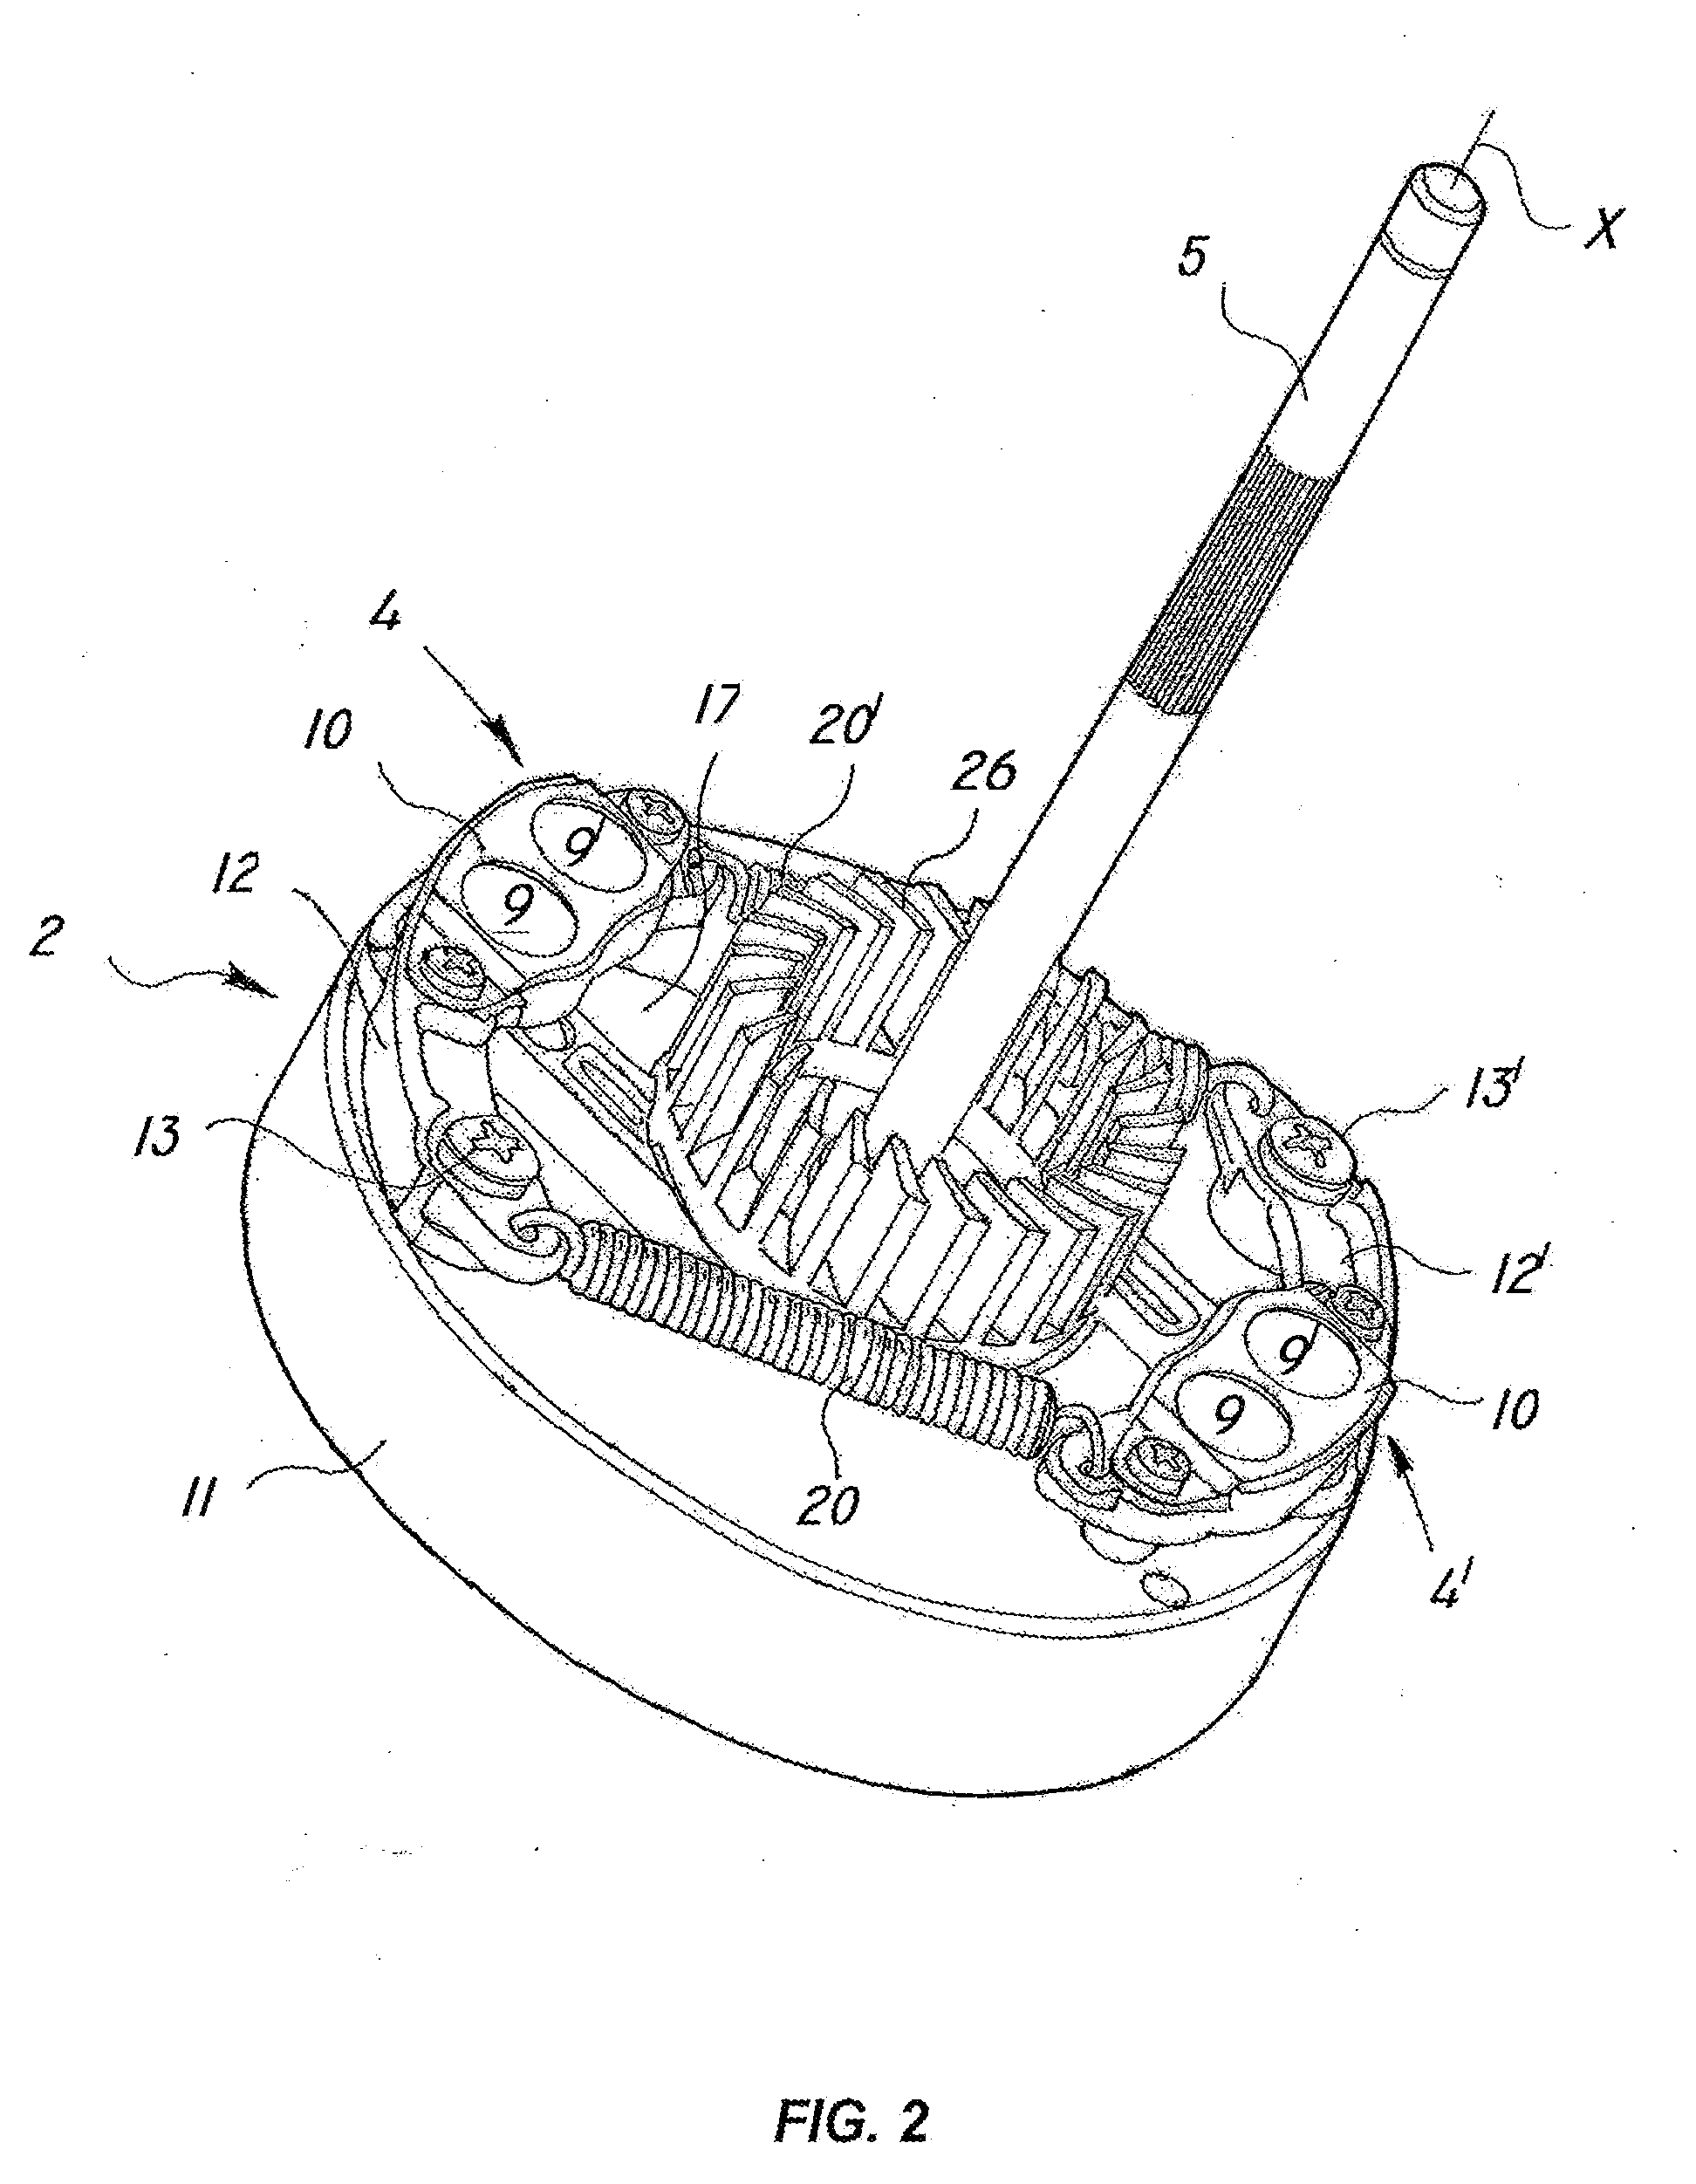 Balanced magnetic brake assembly for exercise cycling apparatus